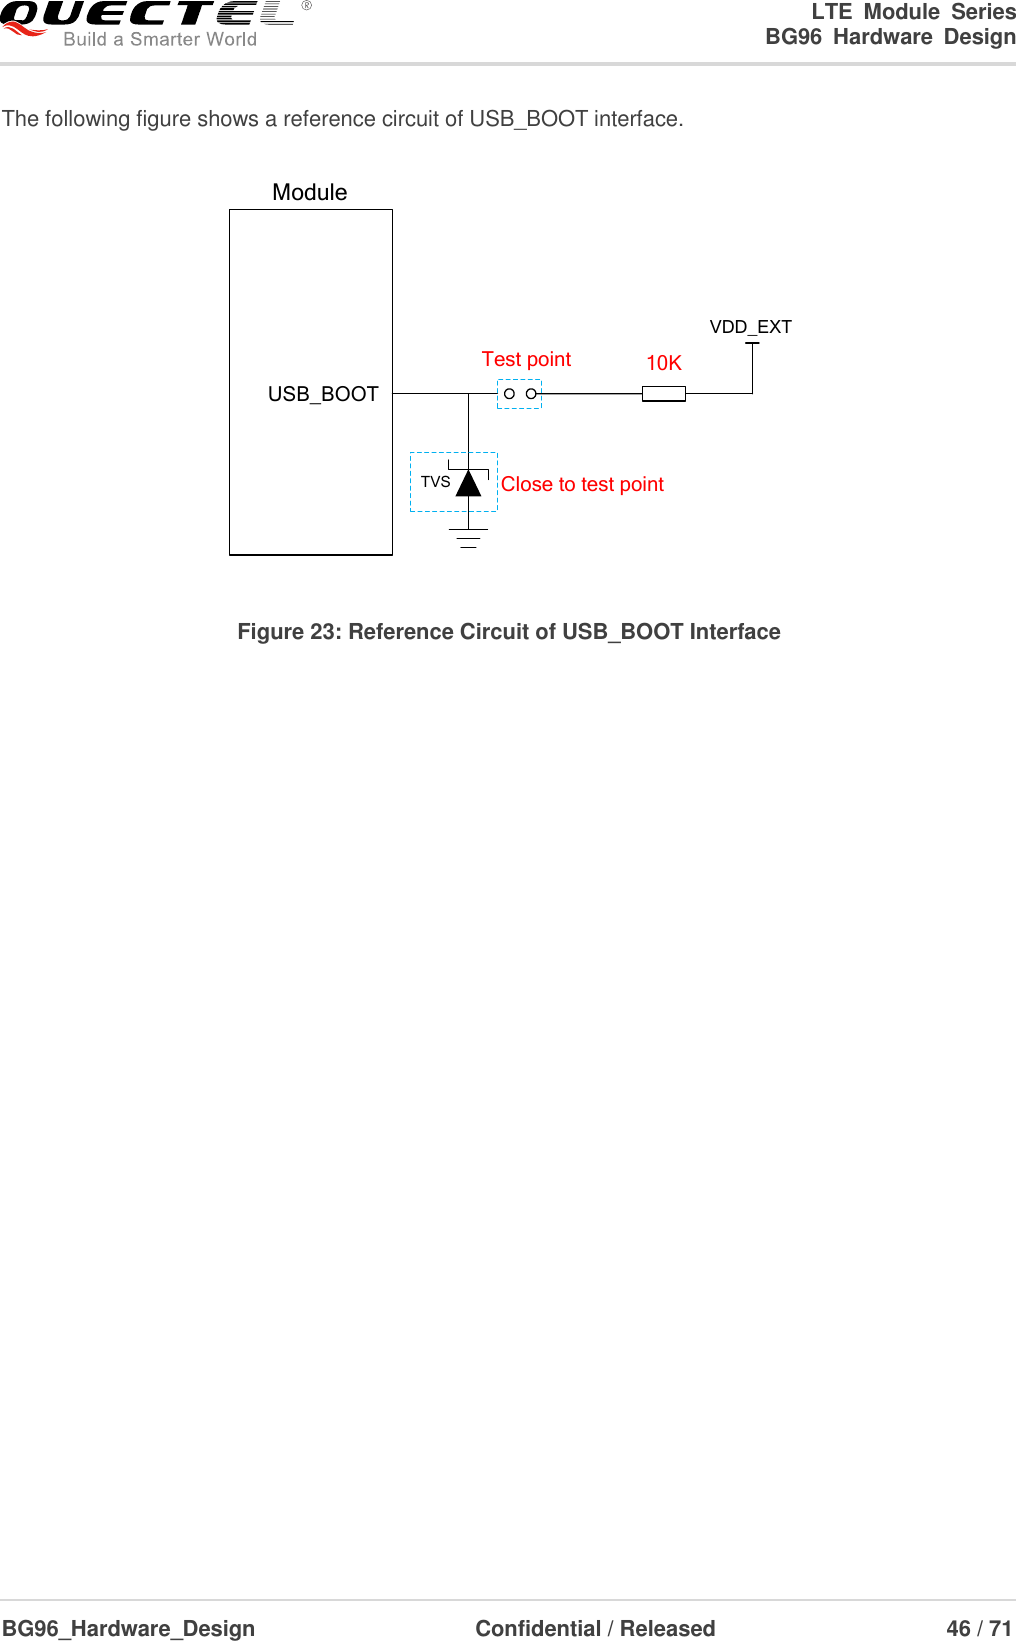 LTE  Module  Series                                                  BG96  Hardware  Design  BG96_Hardware_Design                              Confidential / Released                             46 / 71    The following figure shows a reference circuit of USB_BOOT interface. ModuleUSB_BOOTVDD_EXT10KTest pointTVS Close to test point Figure 23: Reference Circuit of USB_BOOT Interface 